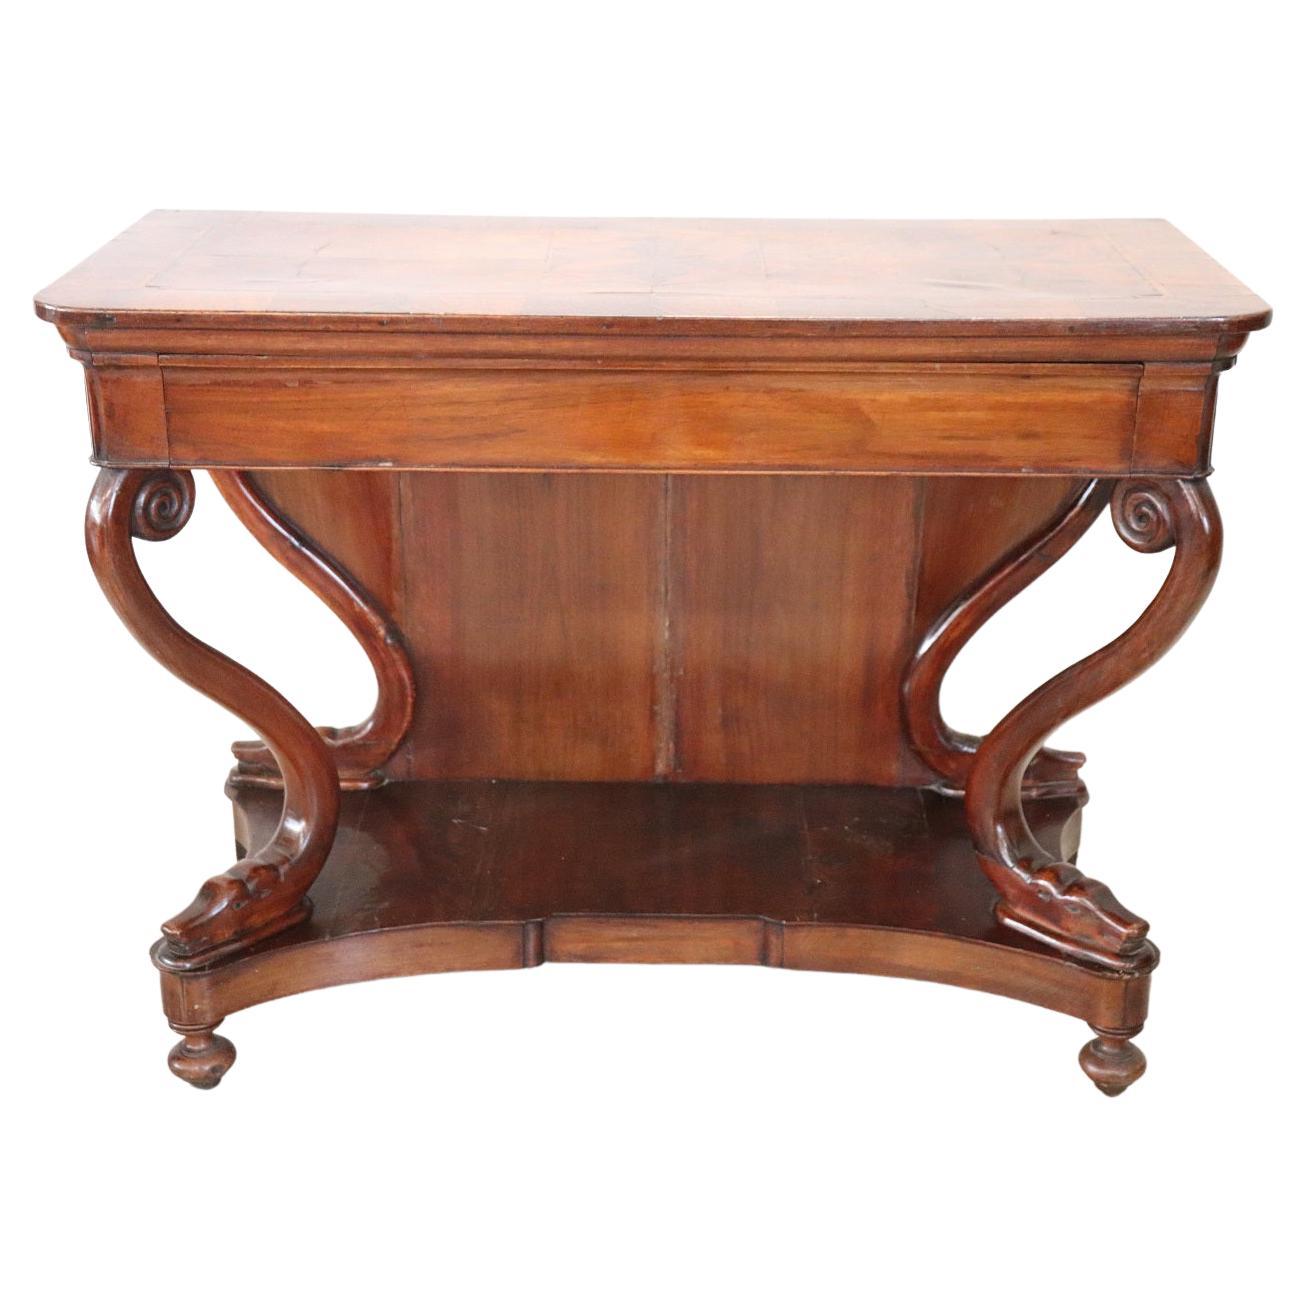 19th Century Italian Carved Walnut Charle X Antique Console Table For Sale